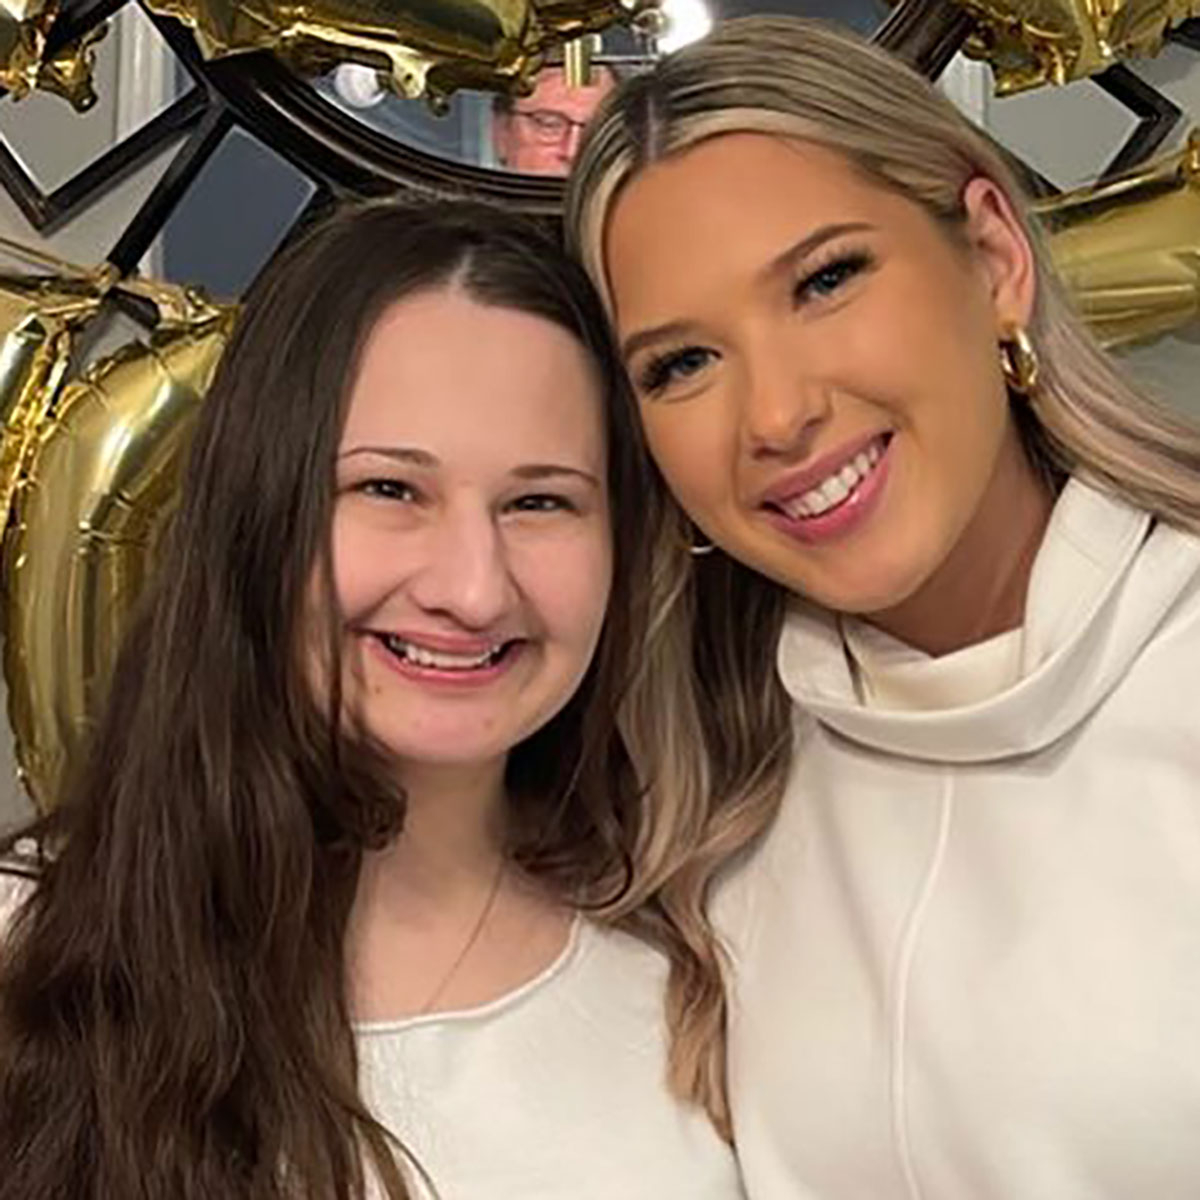 Gypsy Rose Blanchard Shares Photo With Sister as She Reunites With Family After Prison Release - E! NEWS